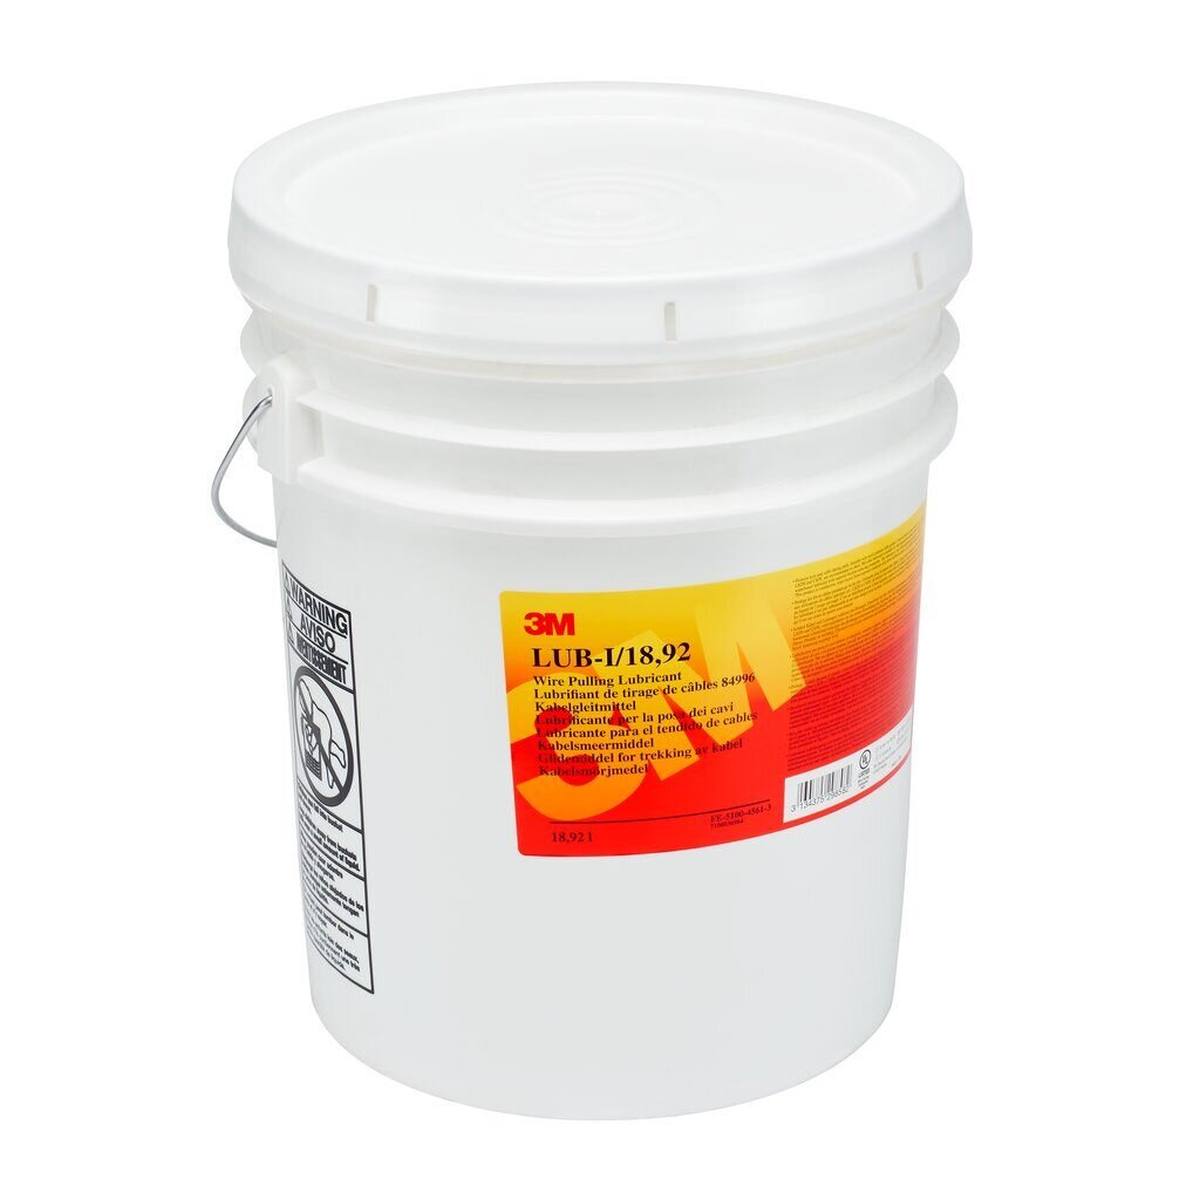 3M Lub-I cable lubricant, 18.2 litres